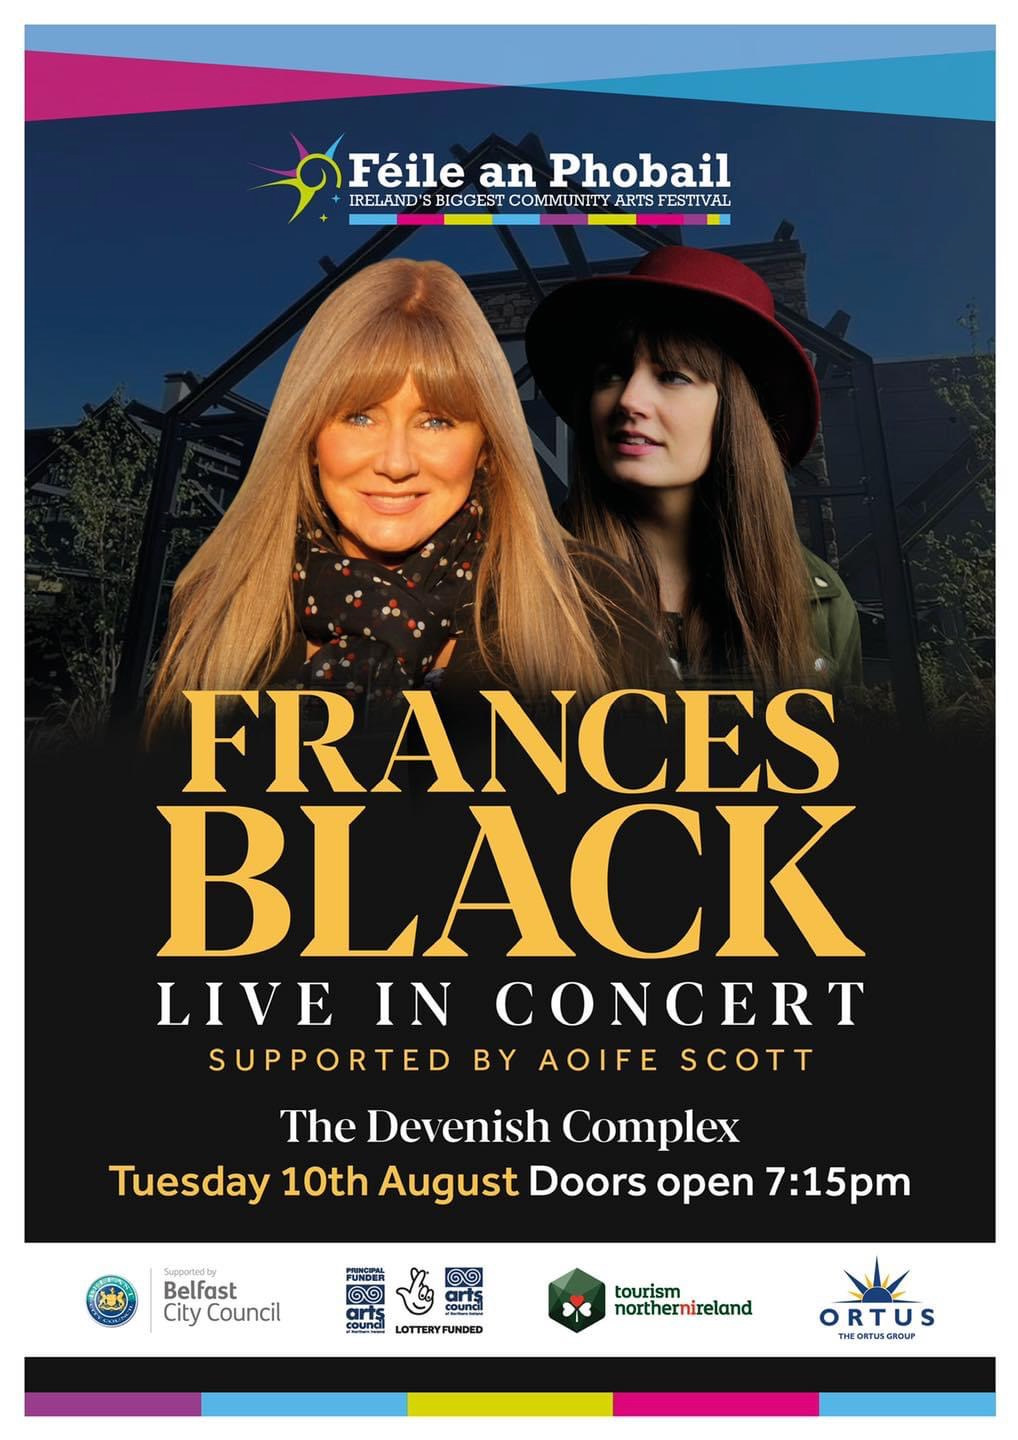 Frances will be performing live at The Devenish Complex in Belfast on Tuesday 10 August. She will be supported by Aoife Scott. Doors open at 7:15pm.